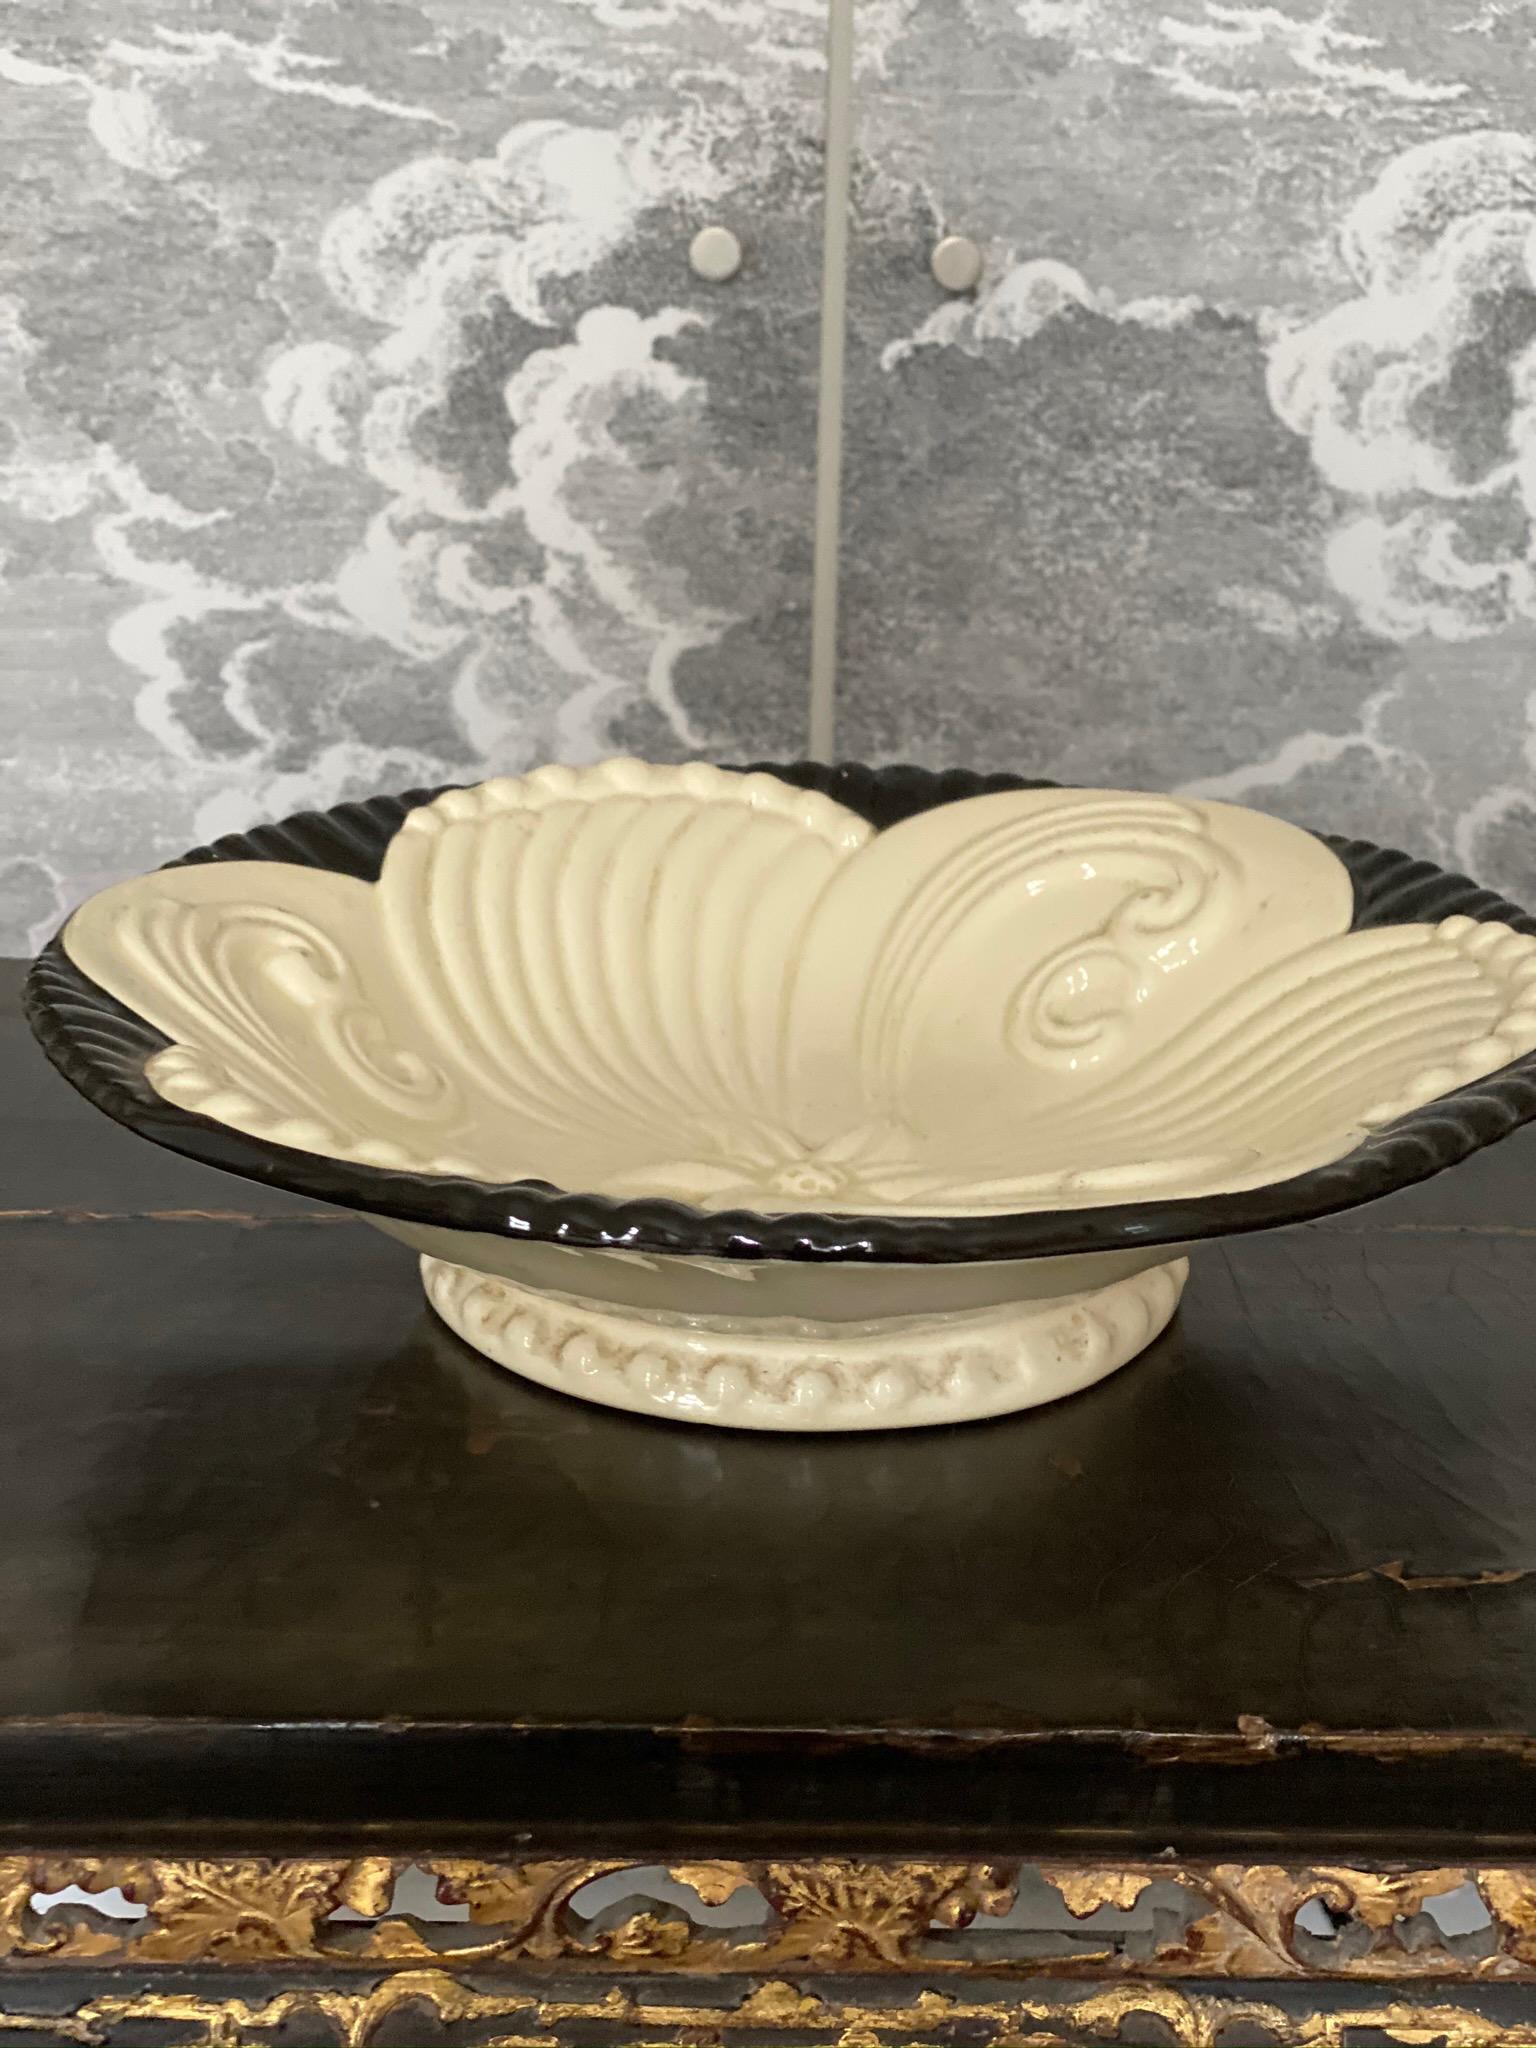 This Art Deco ceramic bowl with foot is from the 1920s. It is round and the floral design is raised and forms a beautiful relief. The black and white glaze accentuates the flower shape and makes the hearts of all Art Deco lovers beat faster.